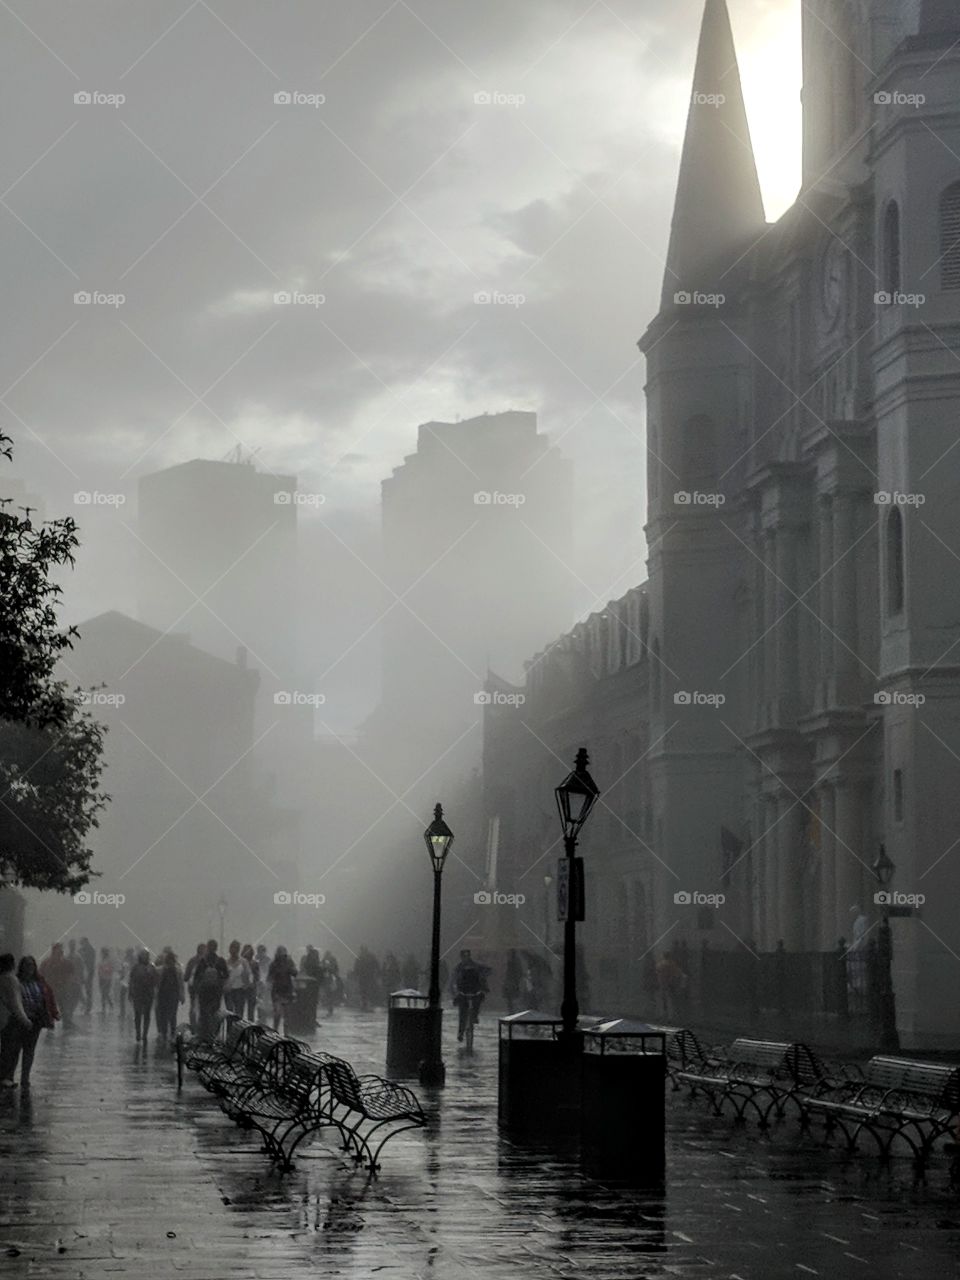 New Orleans in the fog